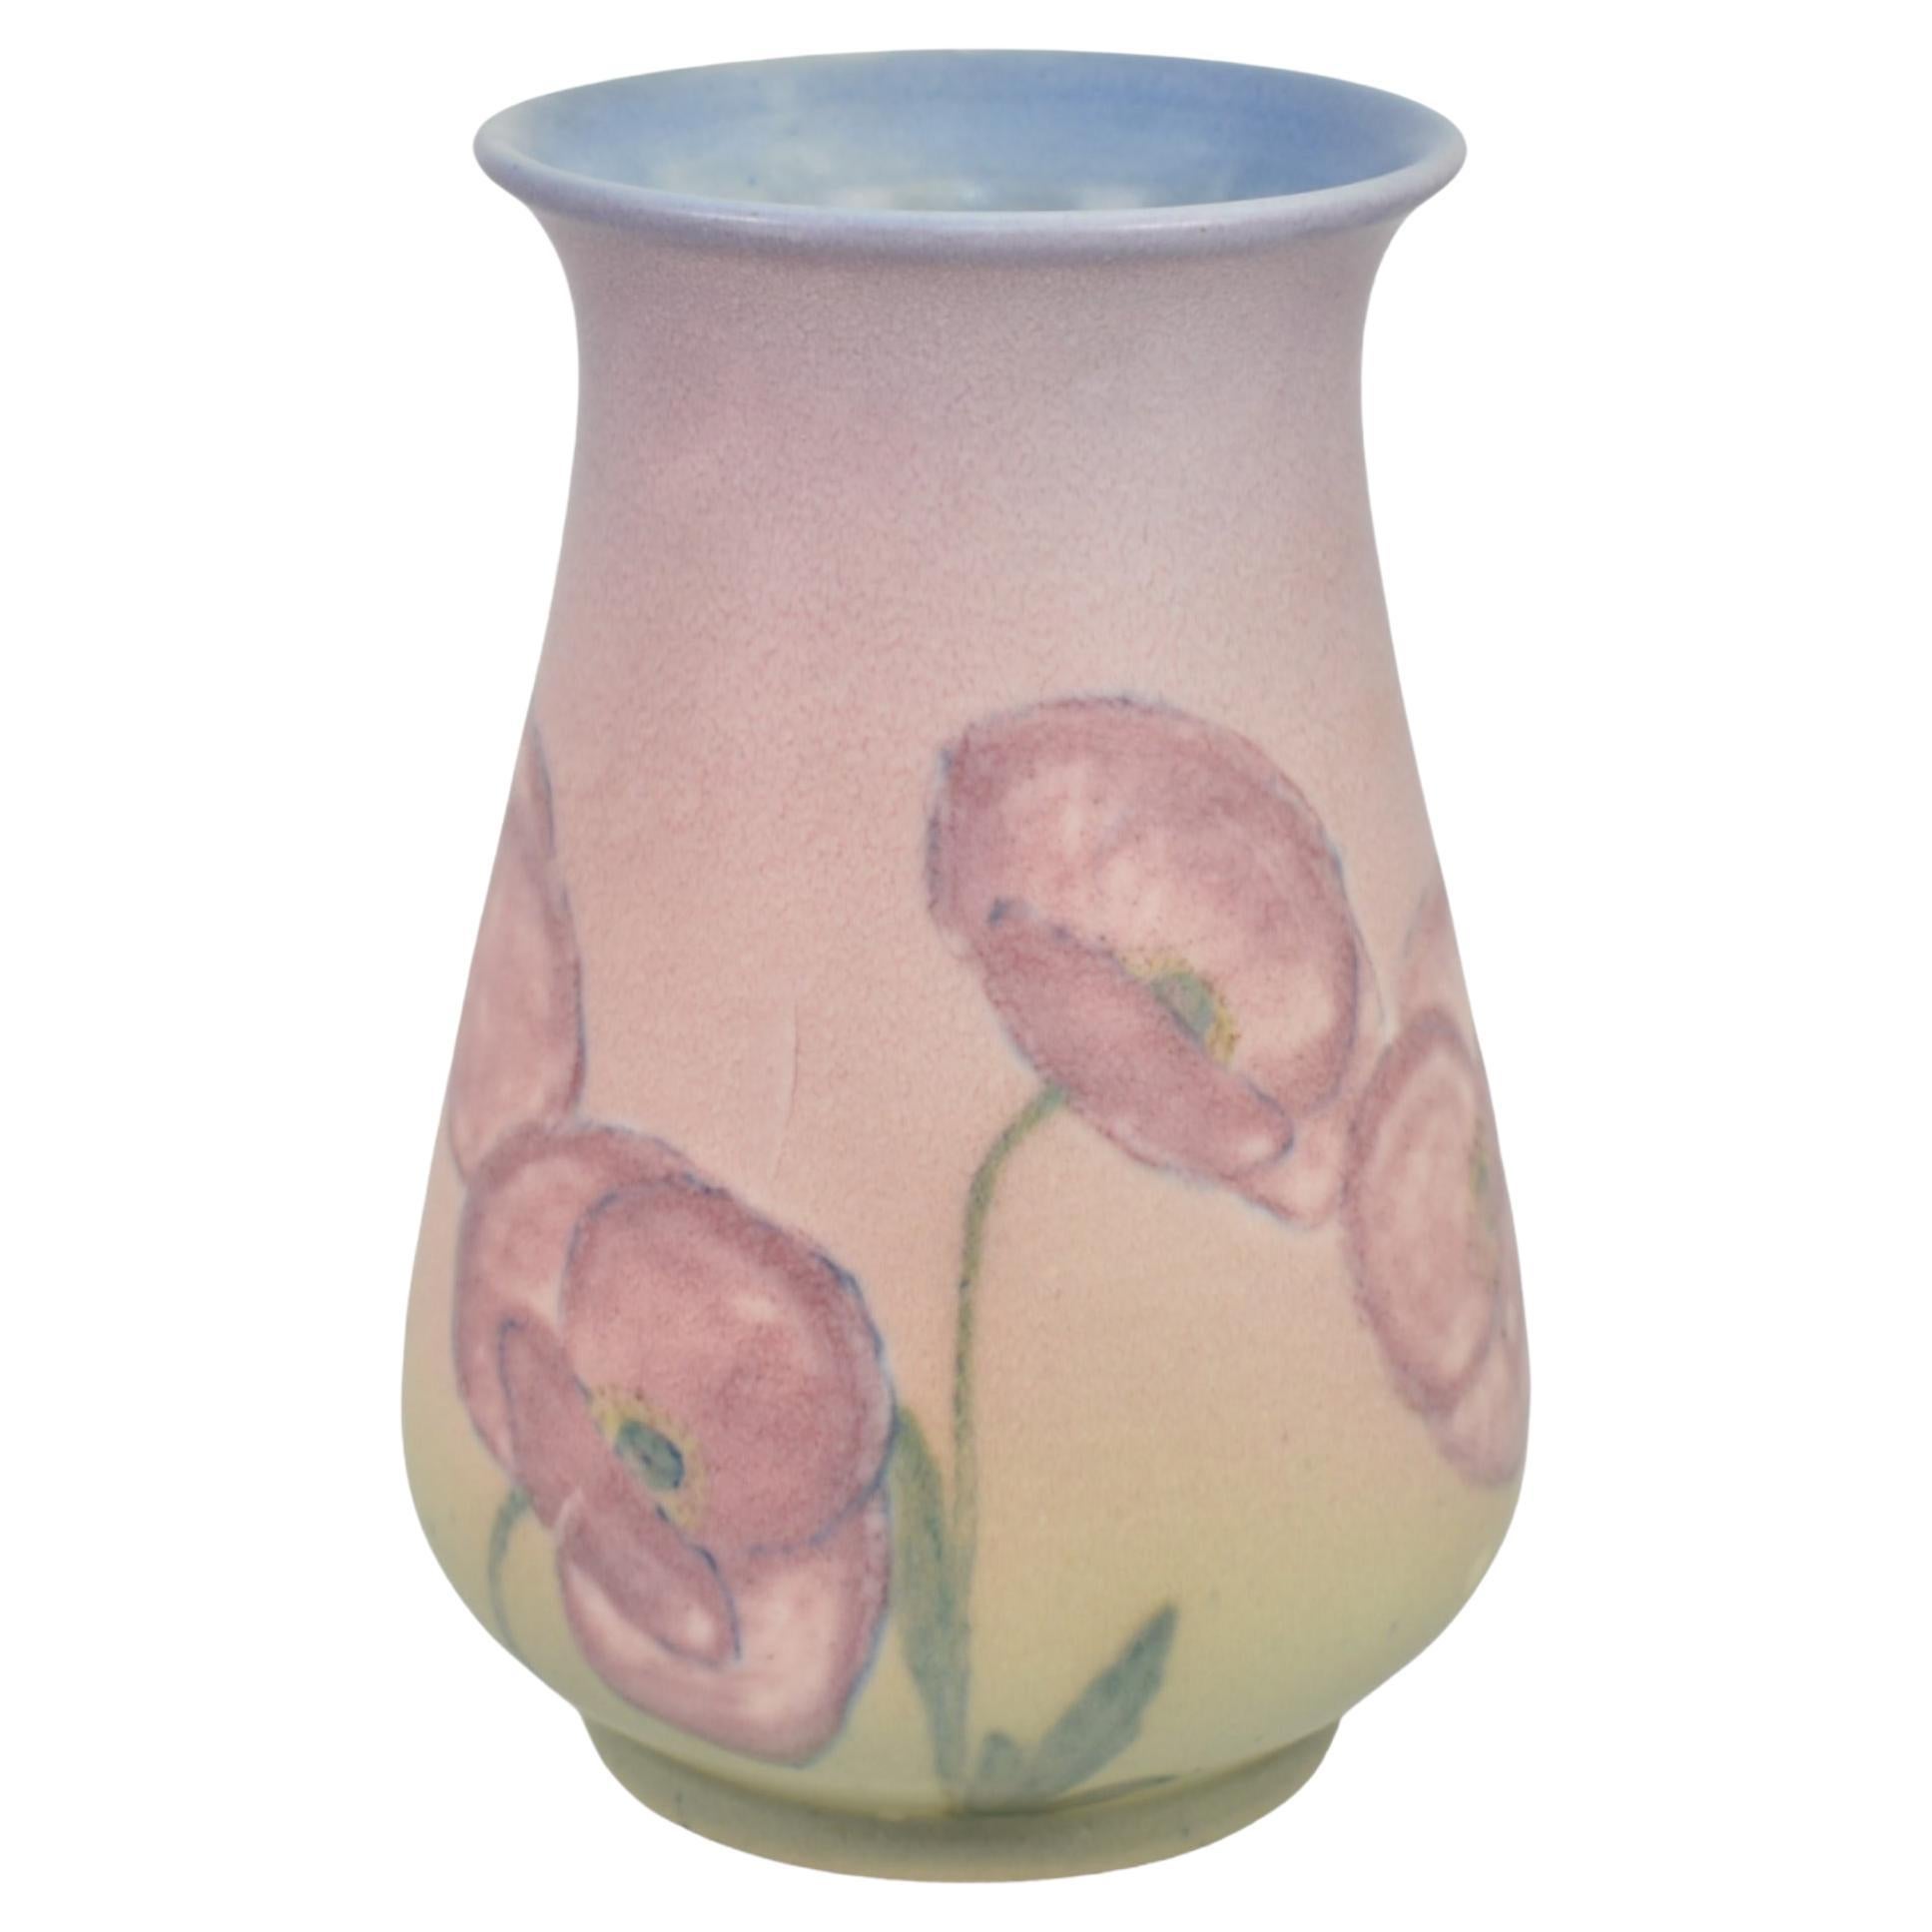 Rookwood Pottery Co. Vases and Vessels